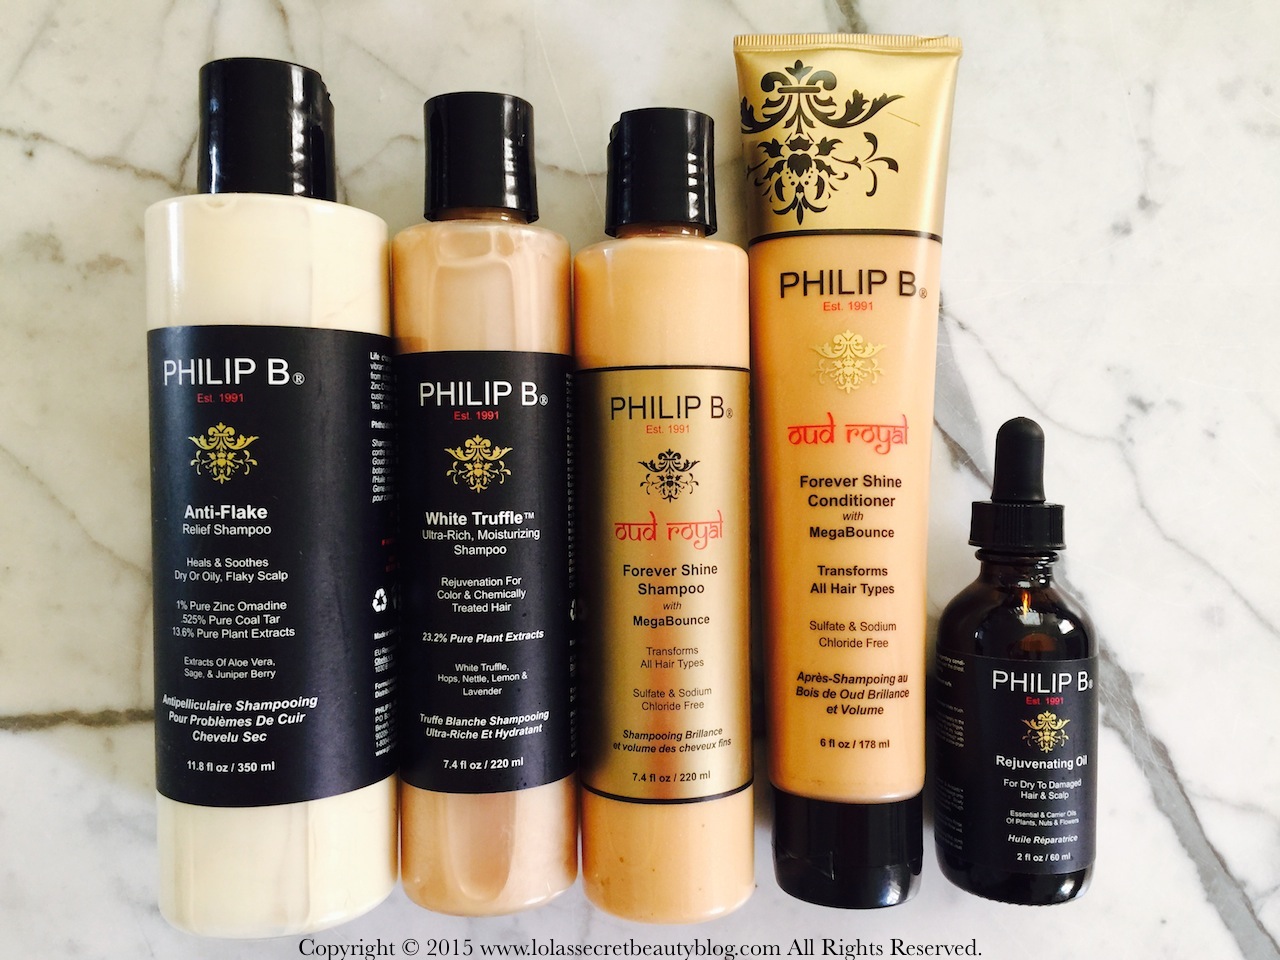 lola's secret beauty blog: Shampoos, Conditioners & Oils for Tresses from Philip B. | An Effusive Review